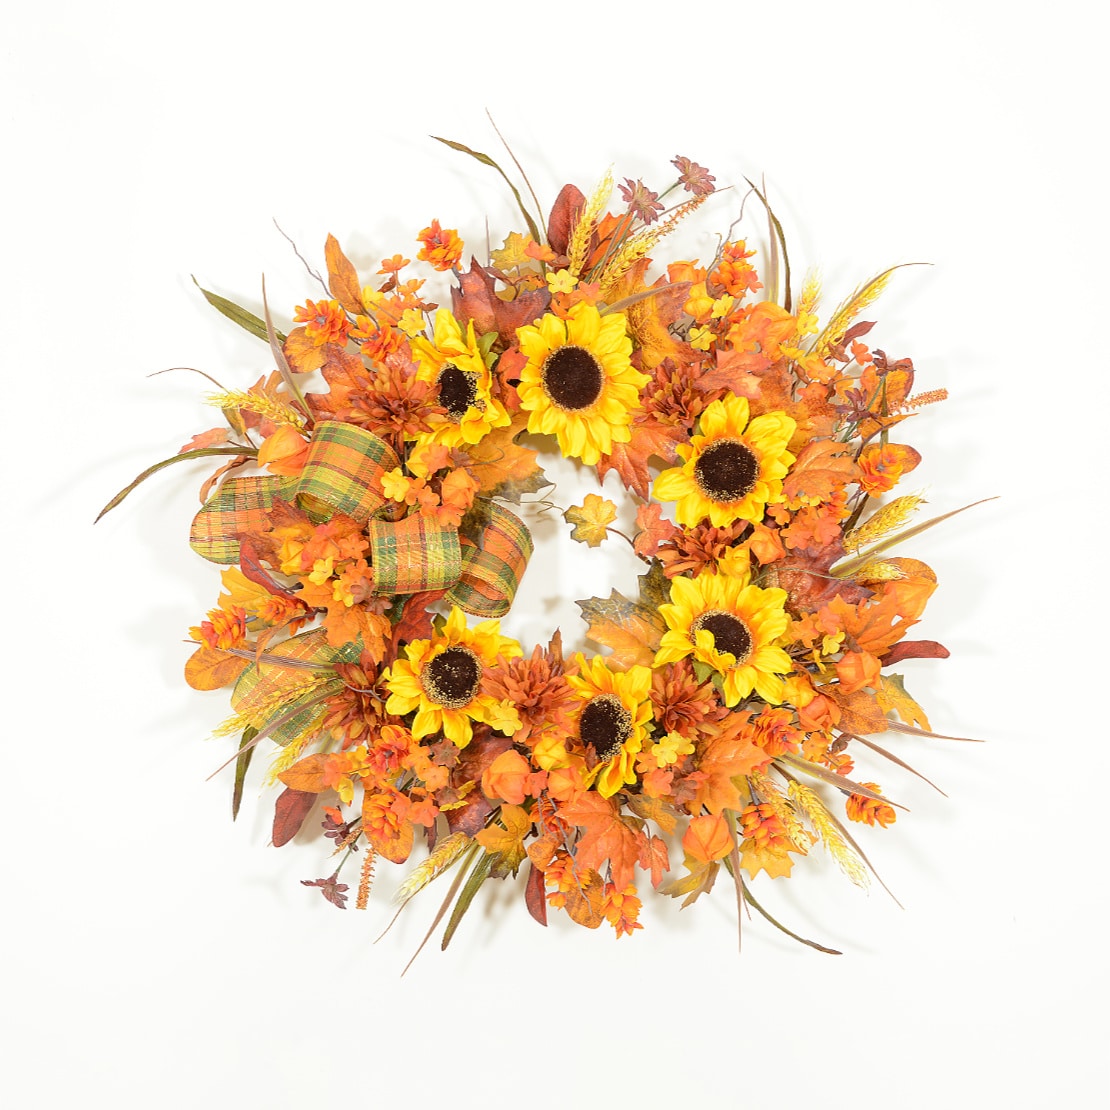 Autumn's Earthly Delights Fall Wreath - Wreaths Unlimited